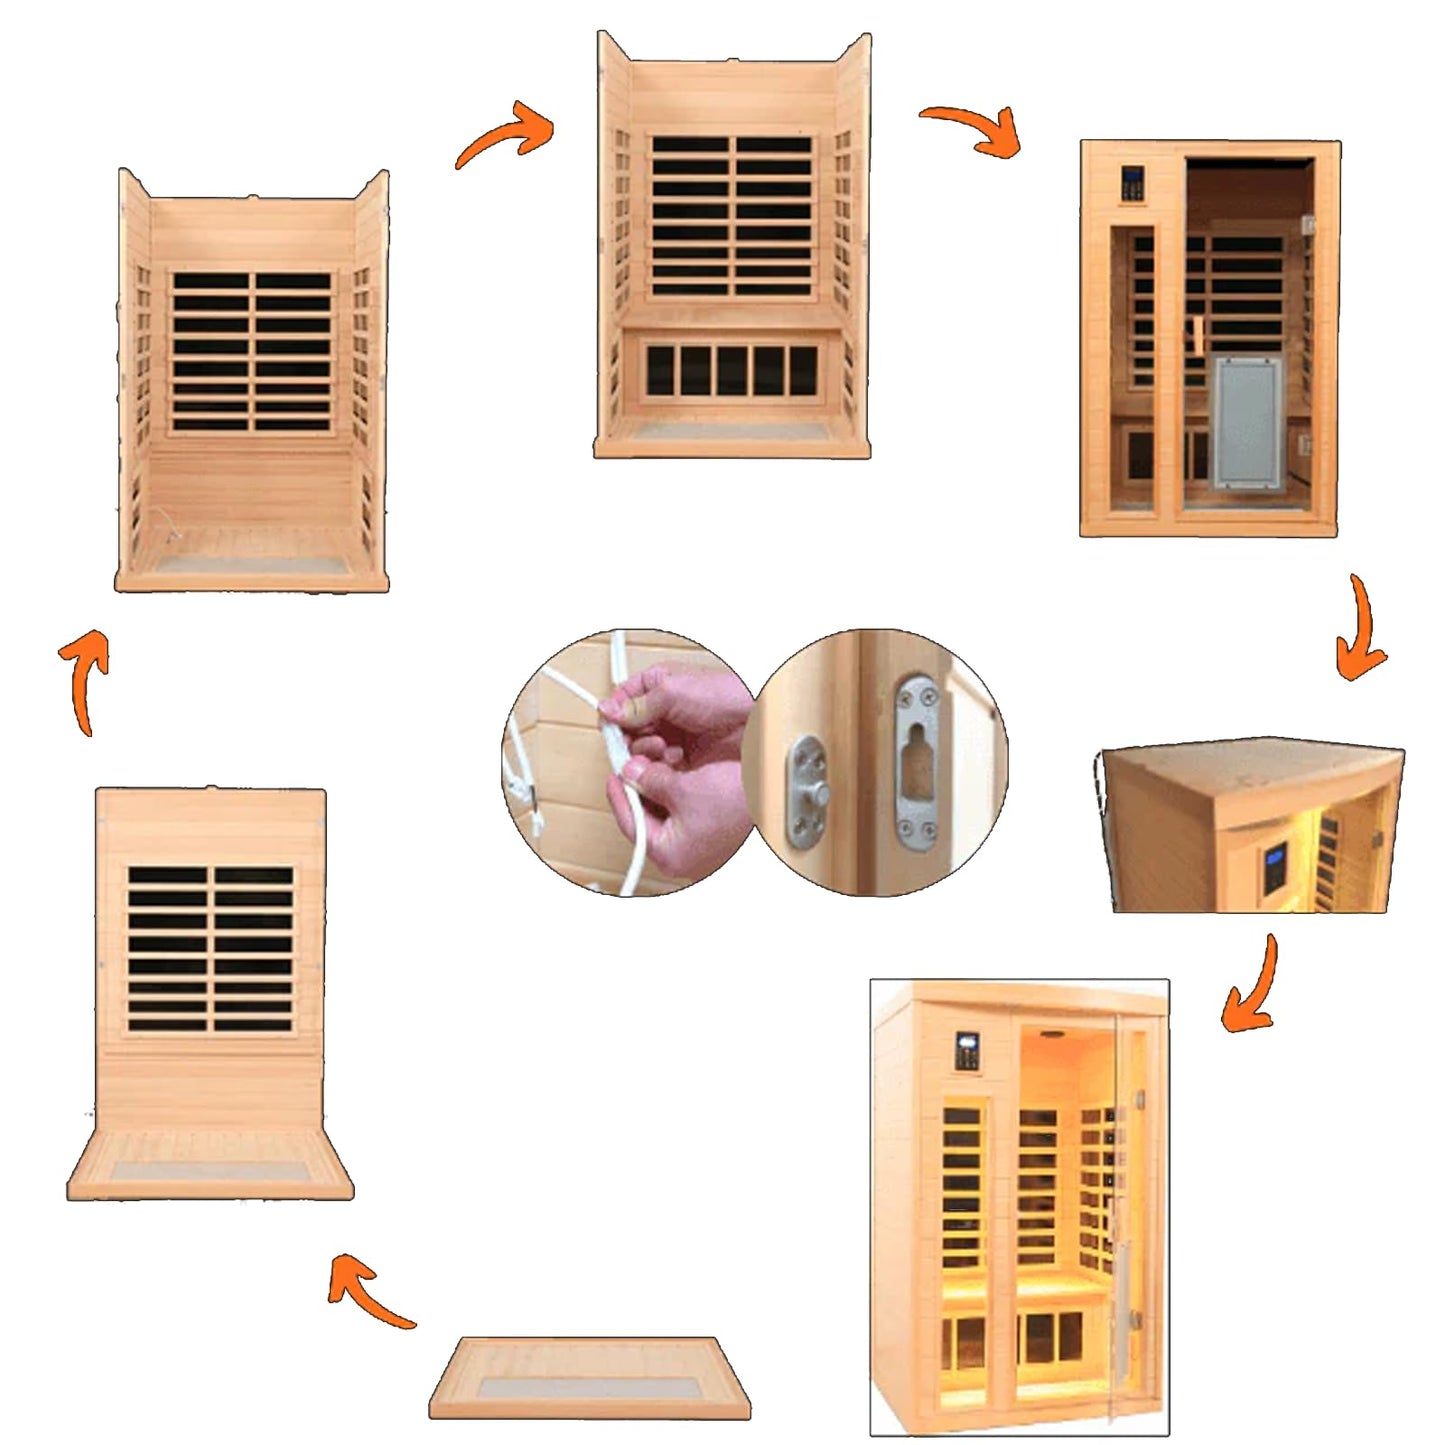 2 Person Hemlock Wood Ultra-Low EMF Far Infrared Sauna For Home, Indoor Home Sauna Spa With 1750w, 9 Heating Plates, LCD Control Panel, 2 Bluetooth Speakers, 3 Chromotherapy Lights, 2 Reading Lights